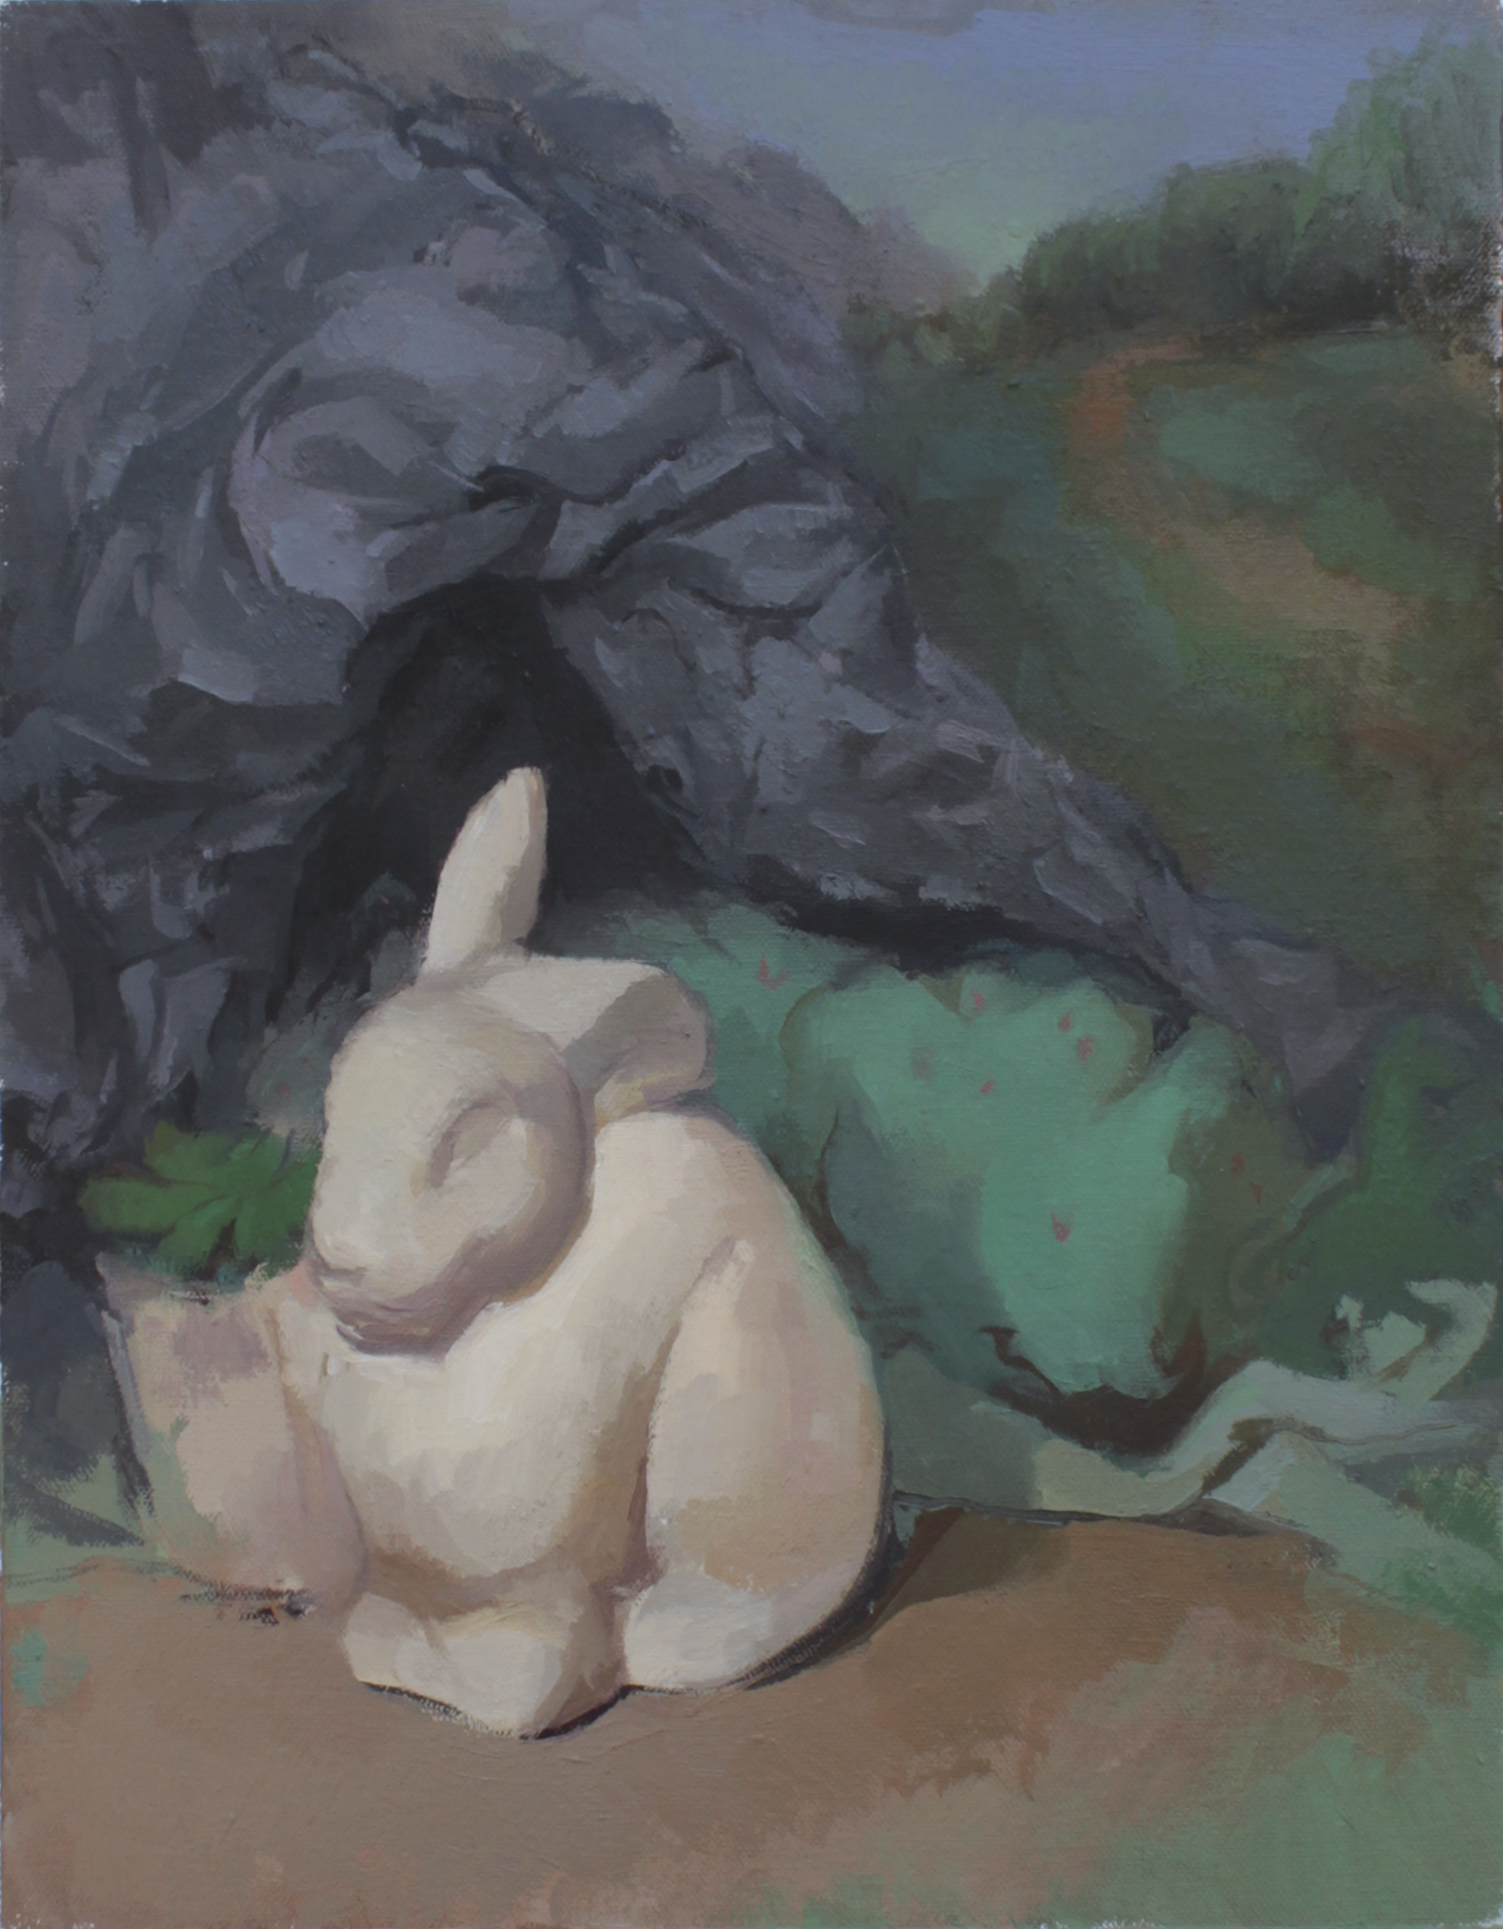    bunny cave     oil on mounted canvas 10.5x13.5" 2013  available by request 